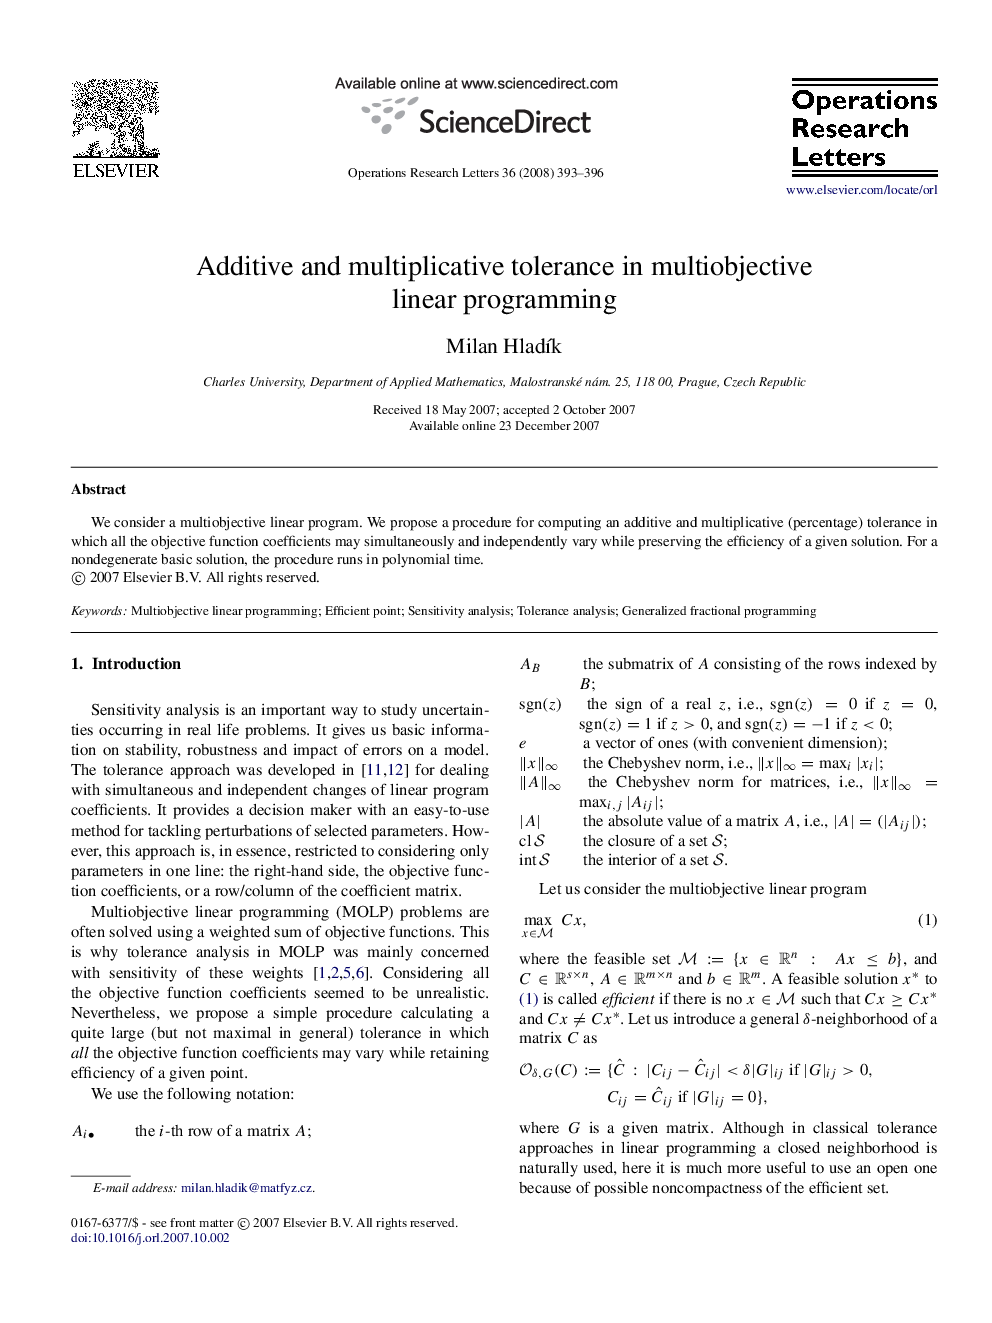 Additive and multiplicative tolerance in multiobjective linear programming